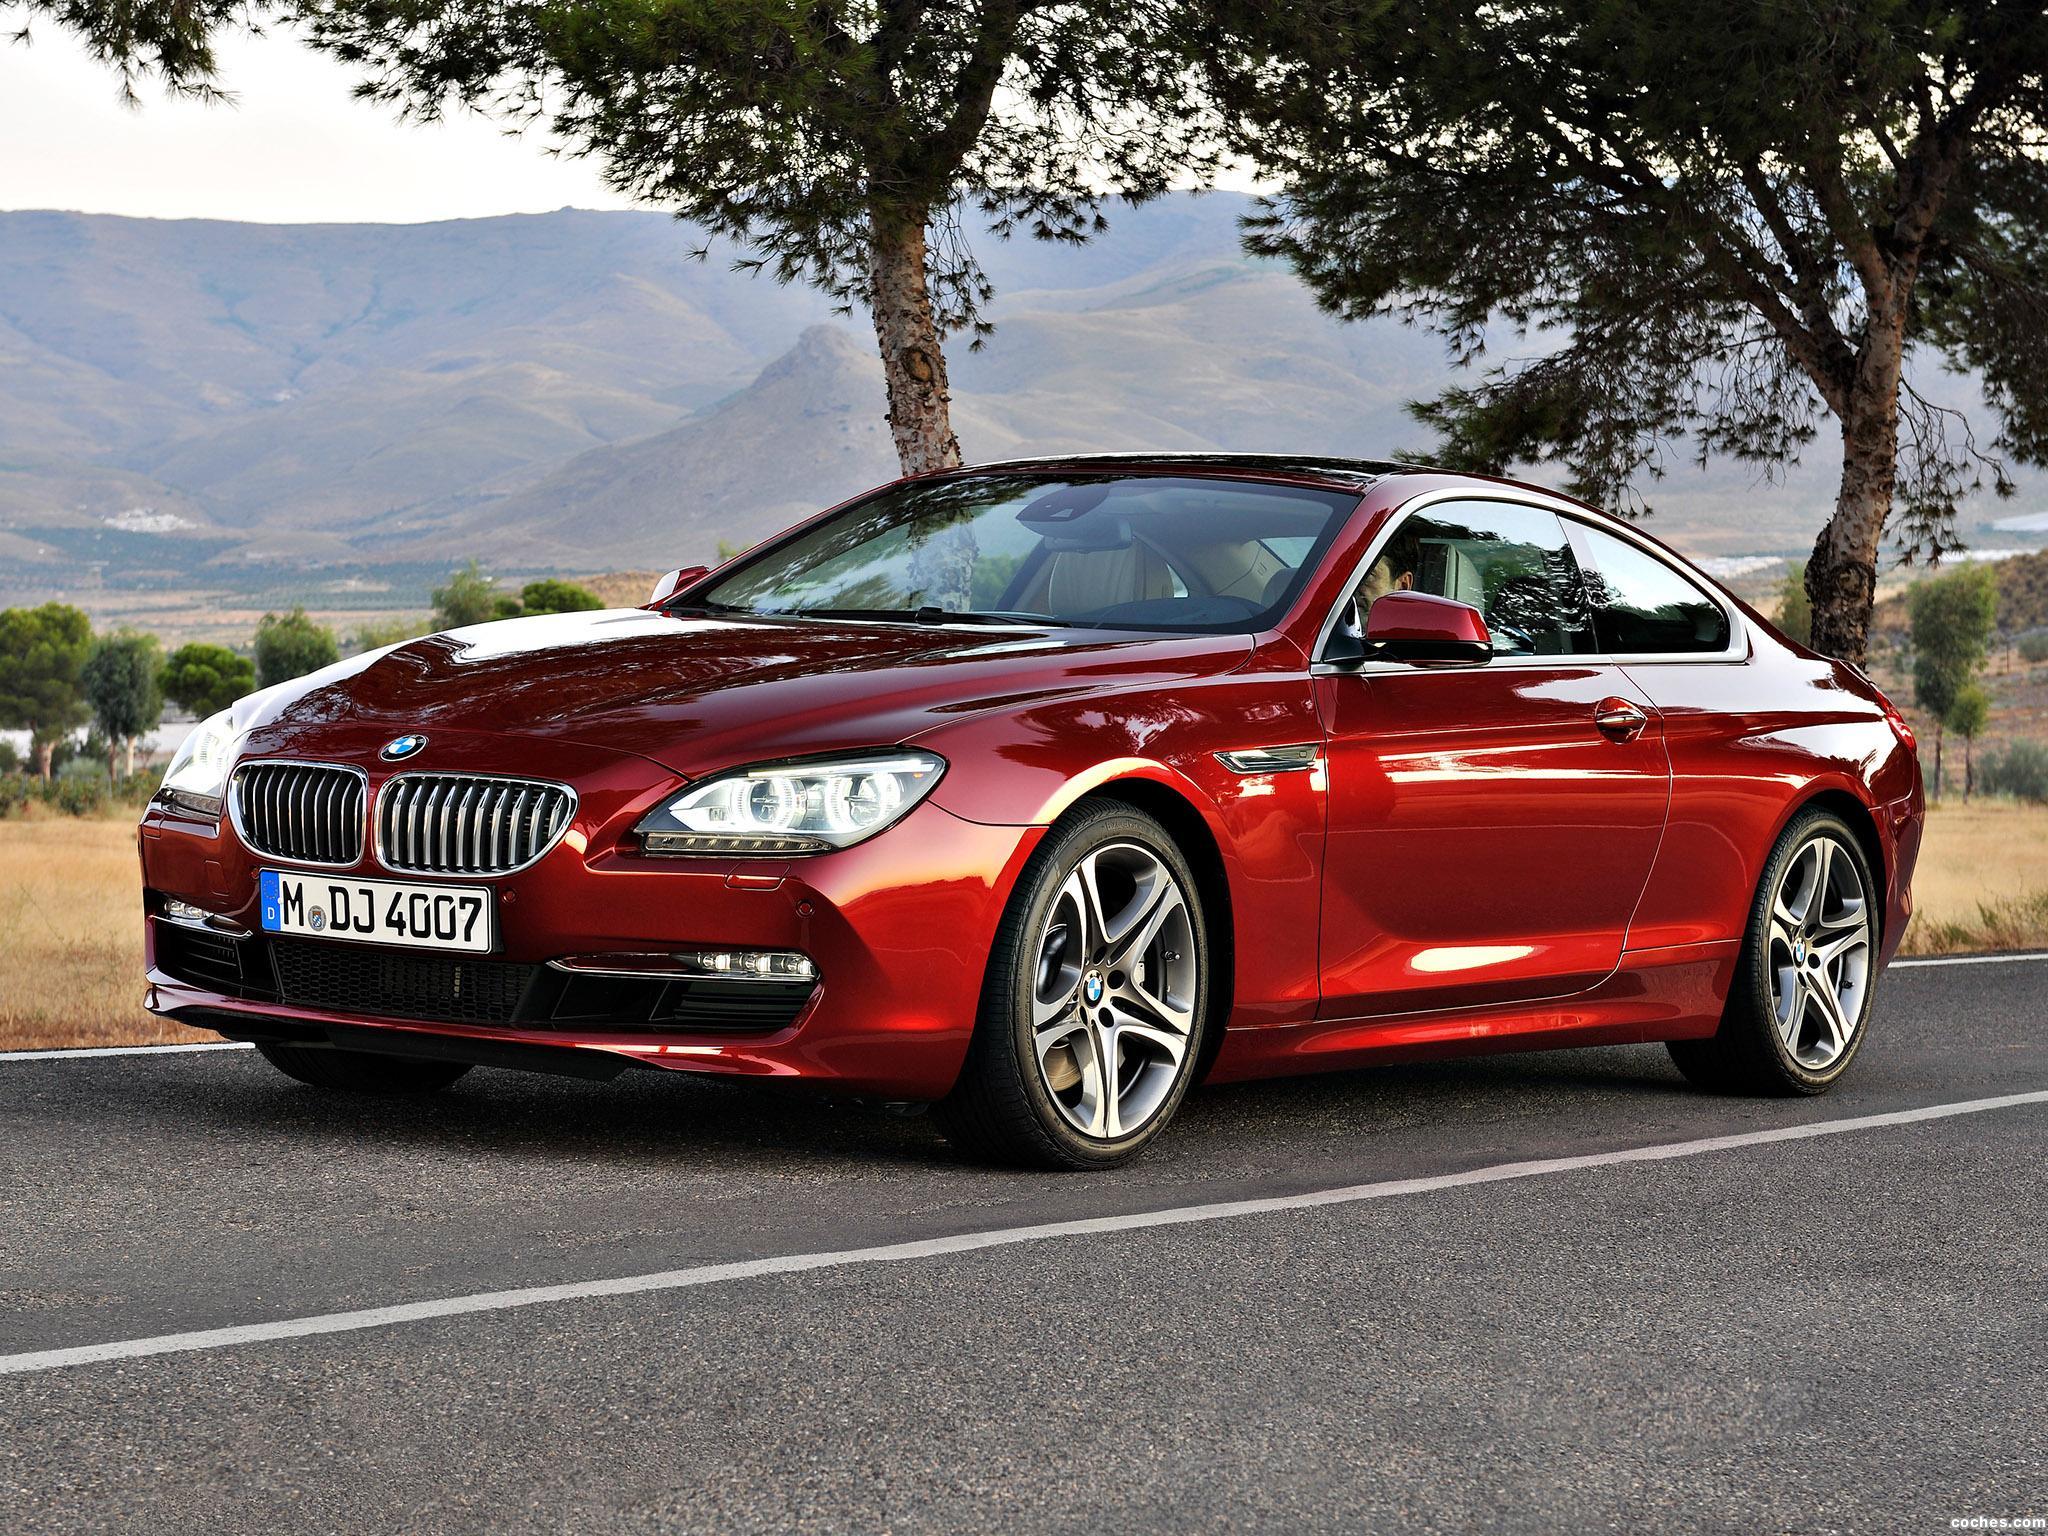 bmw_6-series-coupe-2011_r41